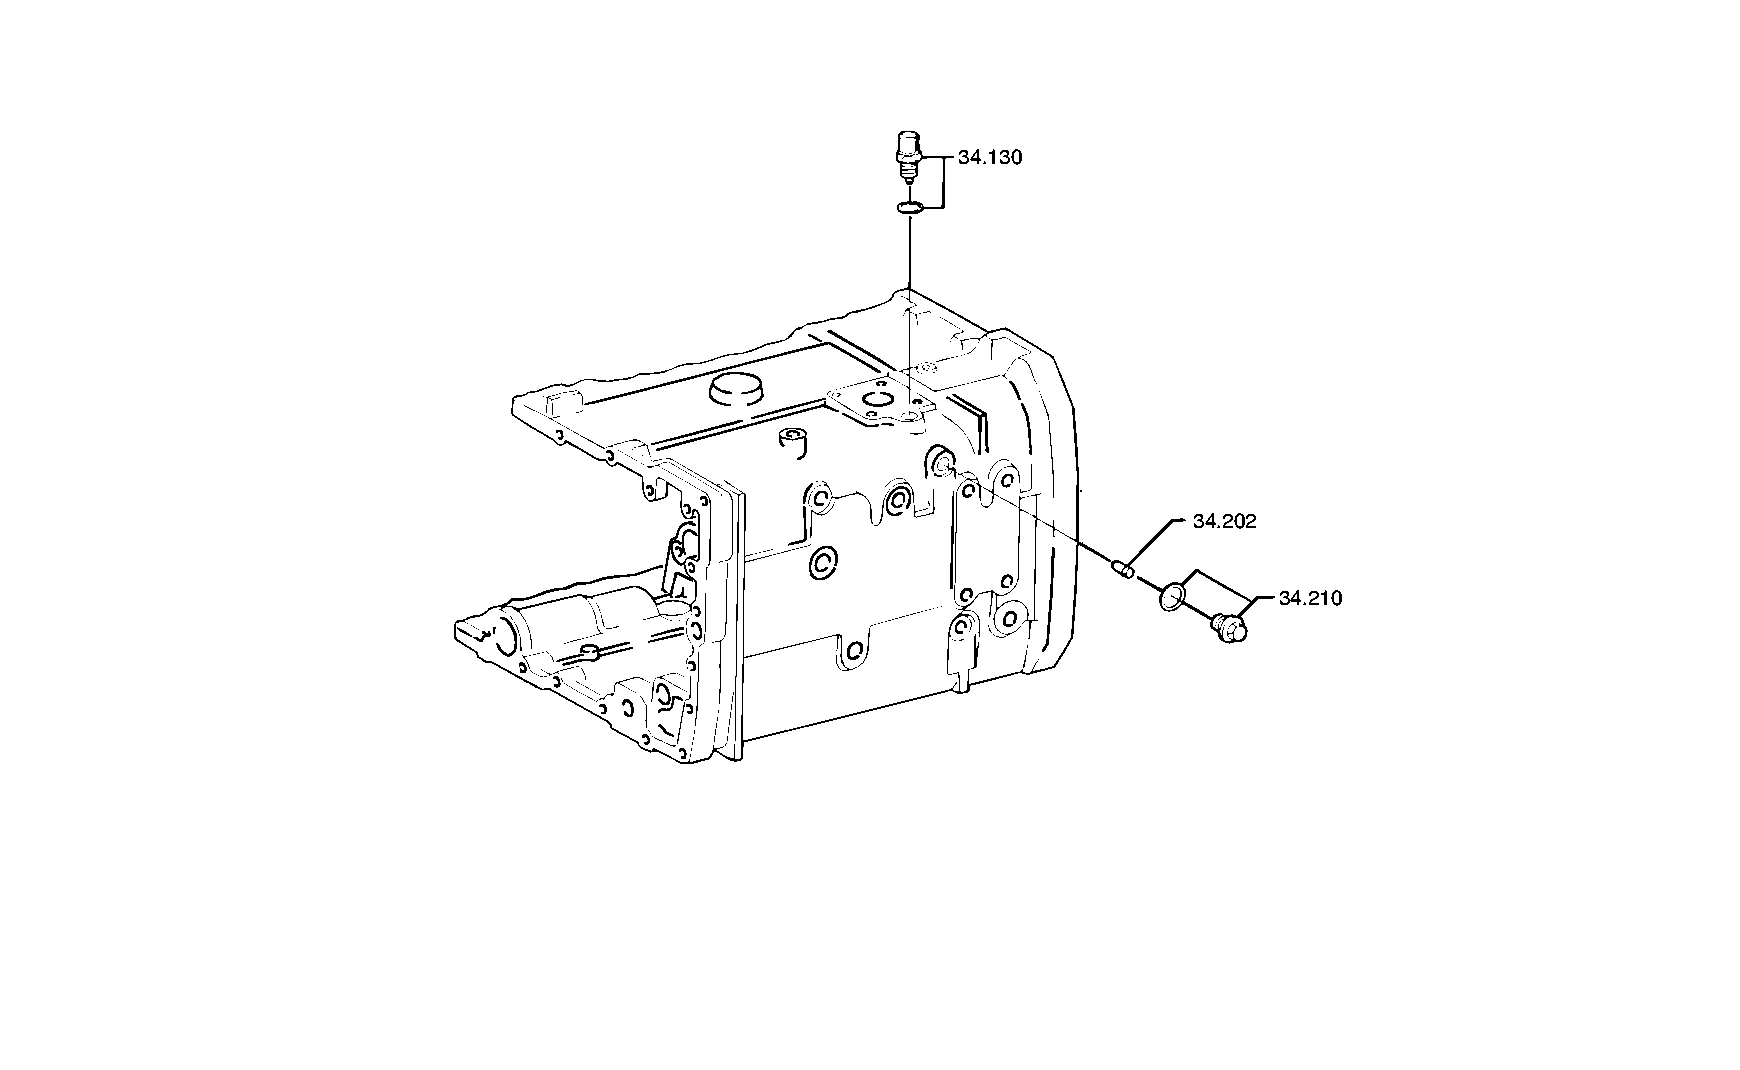 drawing for ASIA MOTORS CO. INC. 409-01-0057 - DETENT PLUNGER (figure 4)